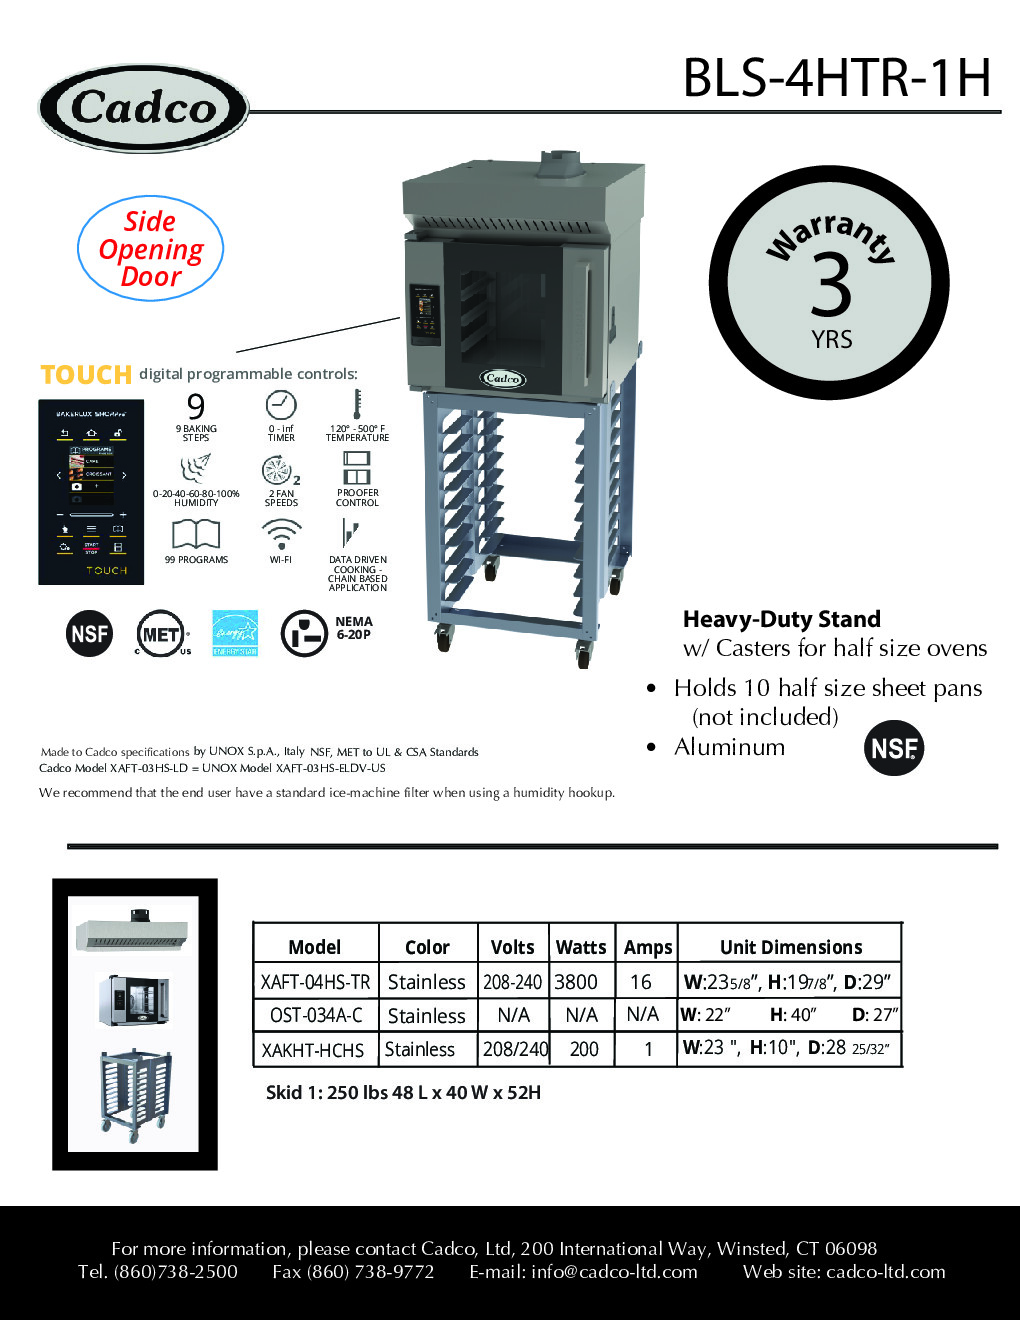 Cadco BLS-4HTR-1H Single-Deck Electric Convection Oven w/ Digital Touch Controls, Half-Size